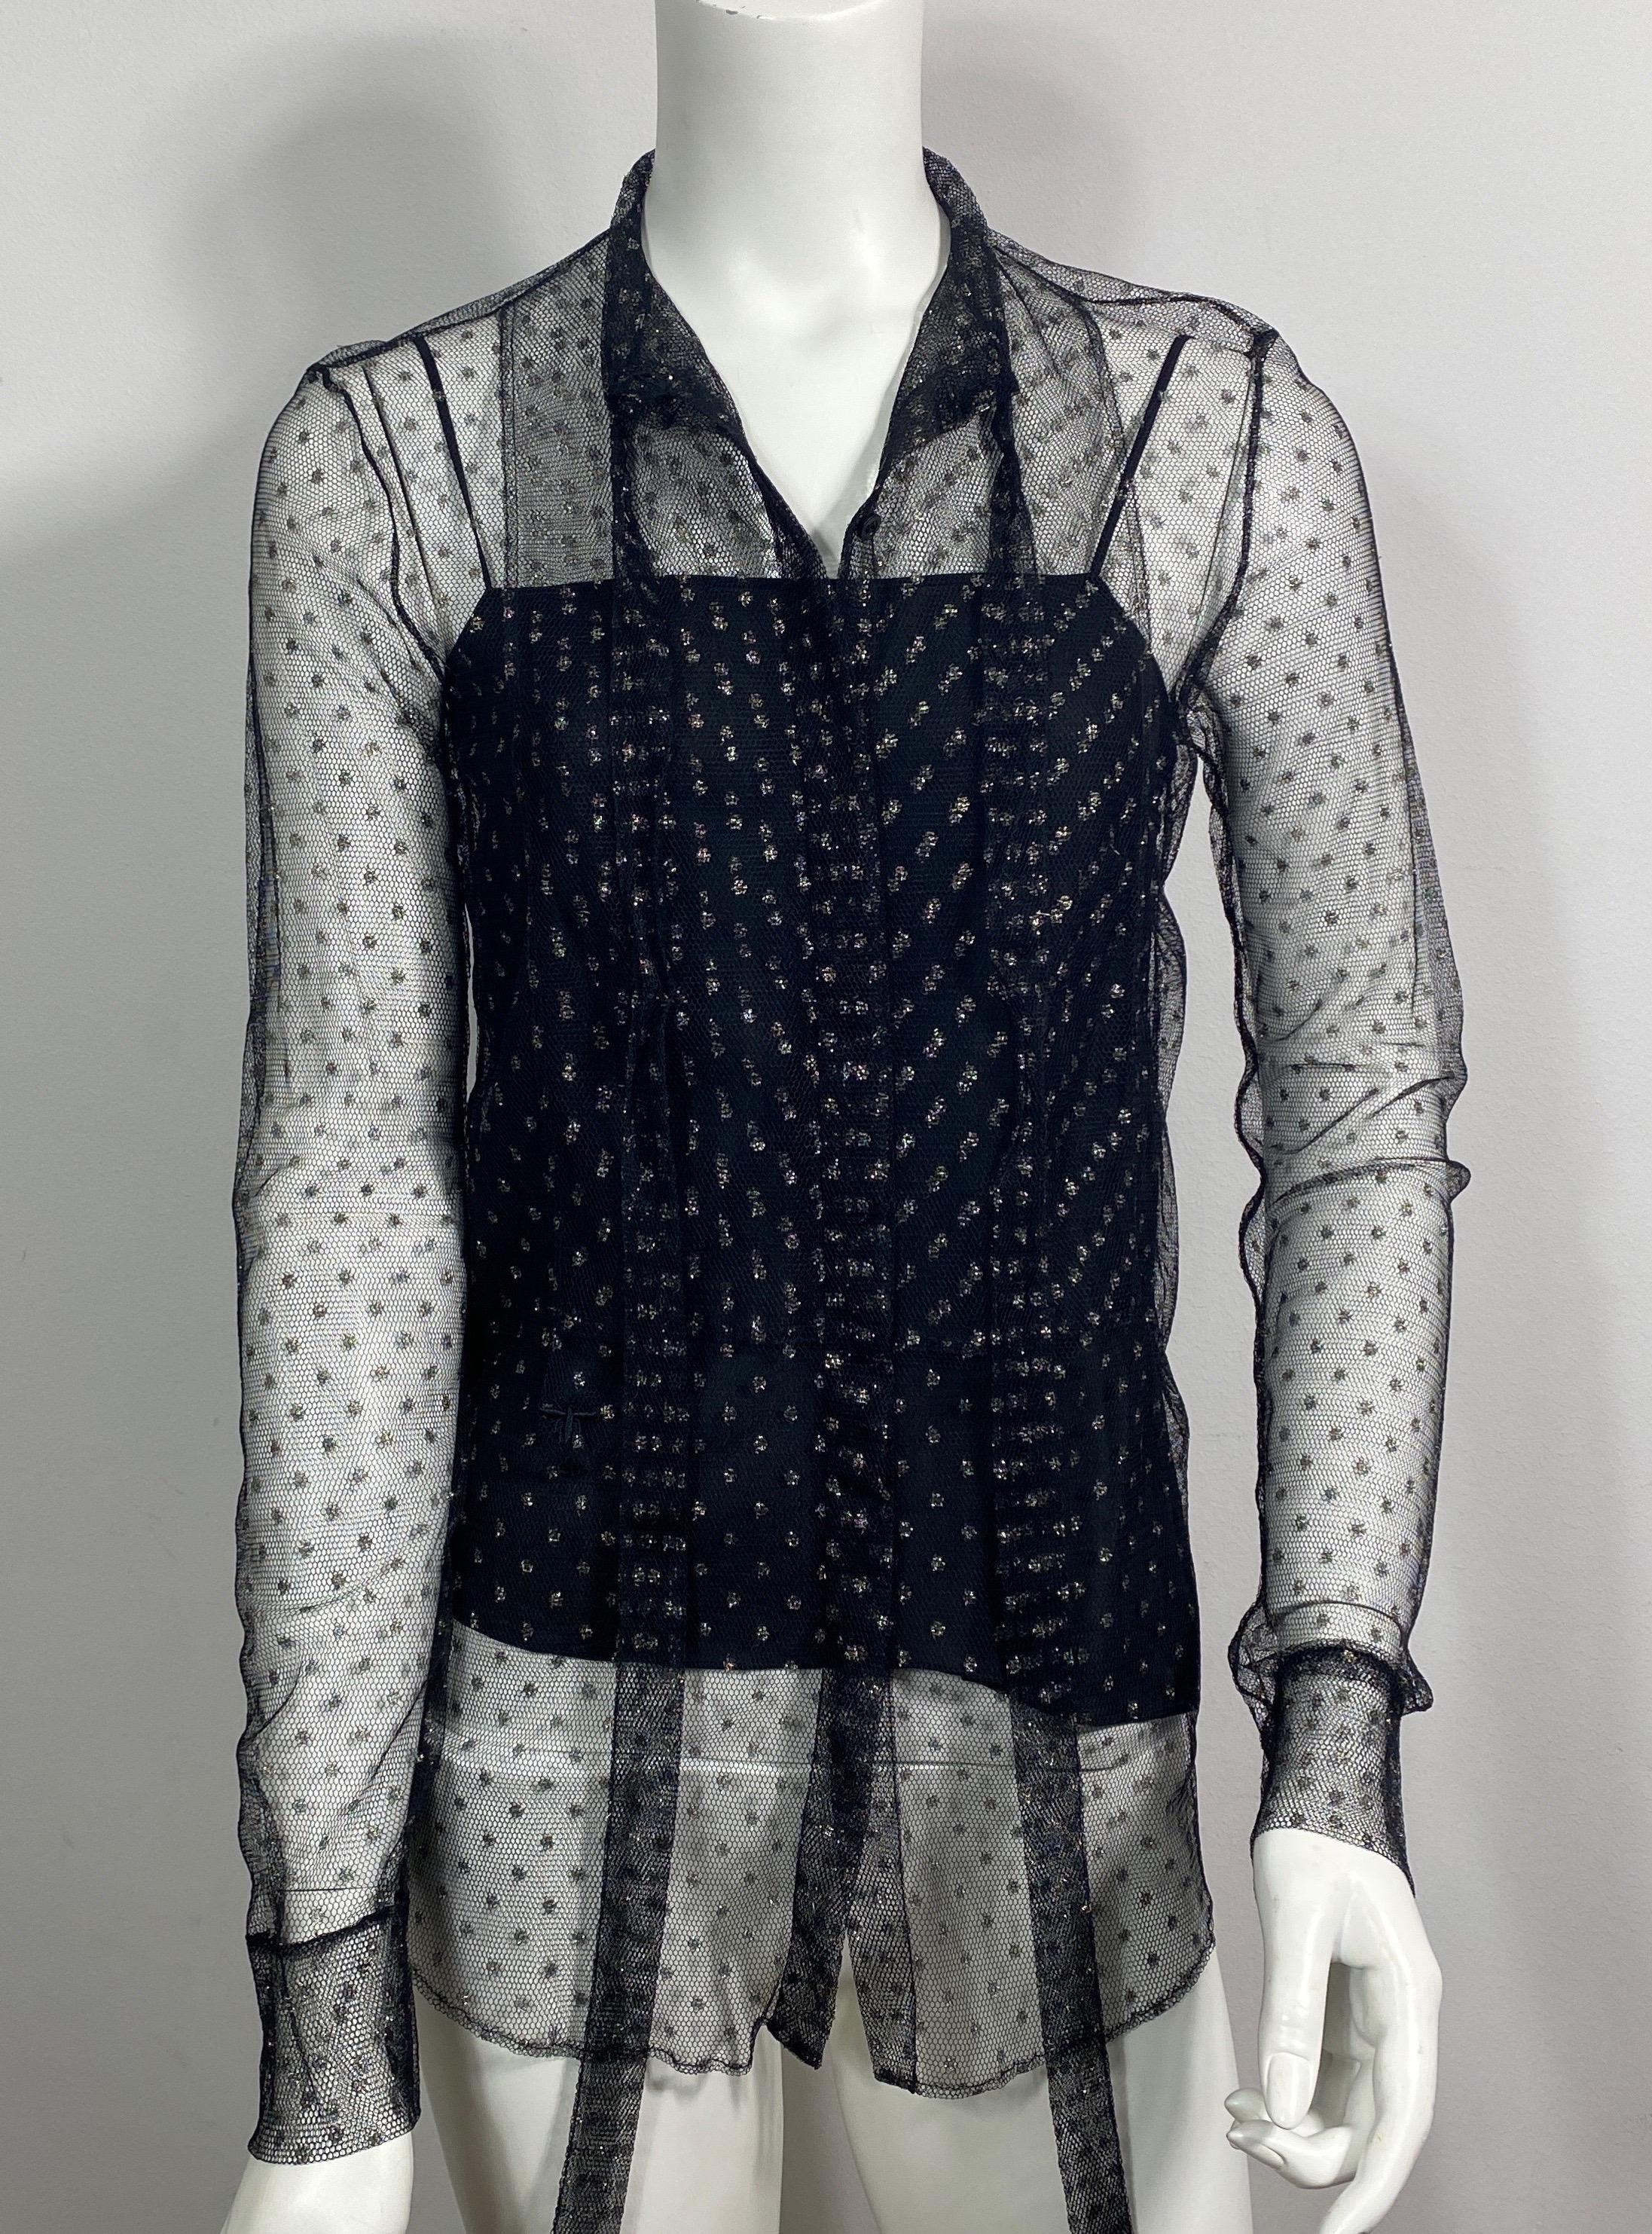 Christian Dior Black and Gold Mini Polka Dot Sheer Mesh Top - Size Small For Sale 2